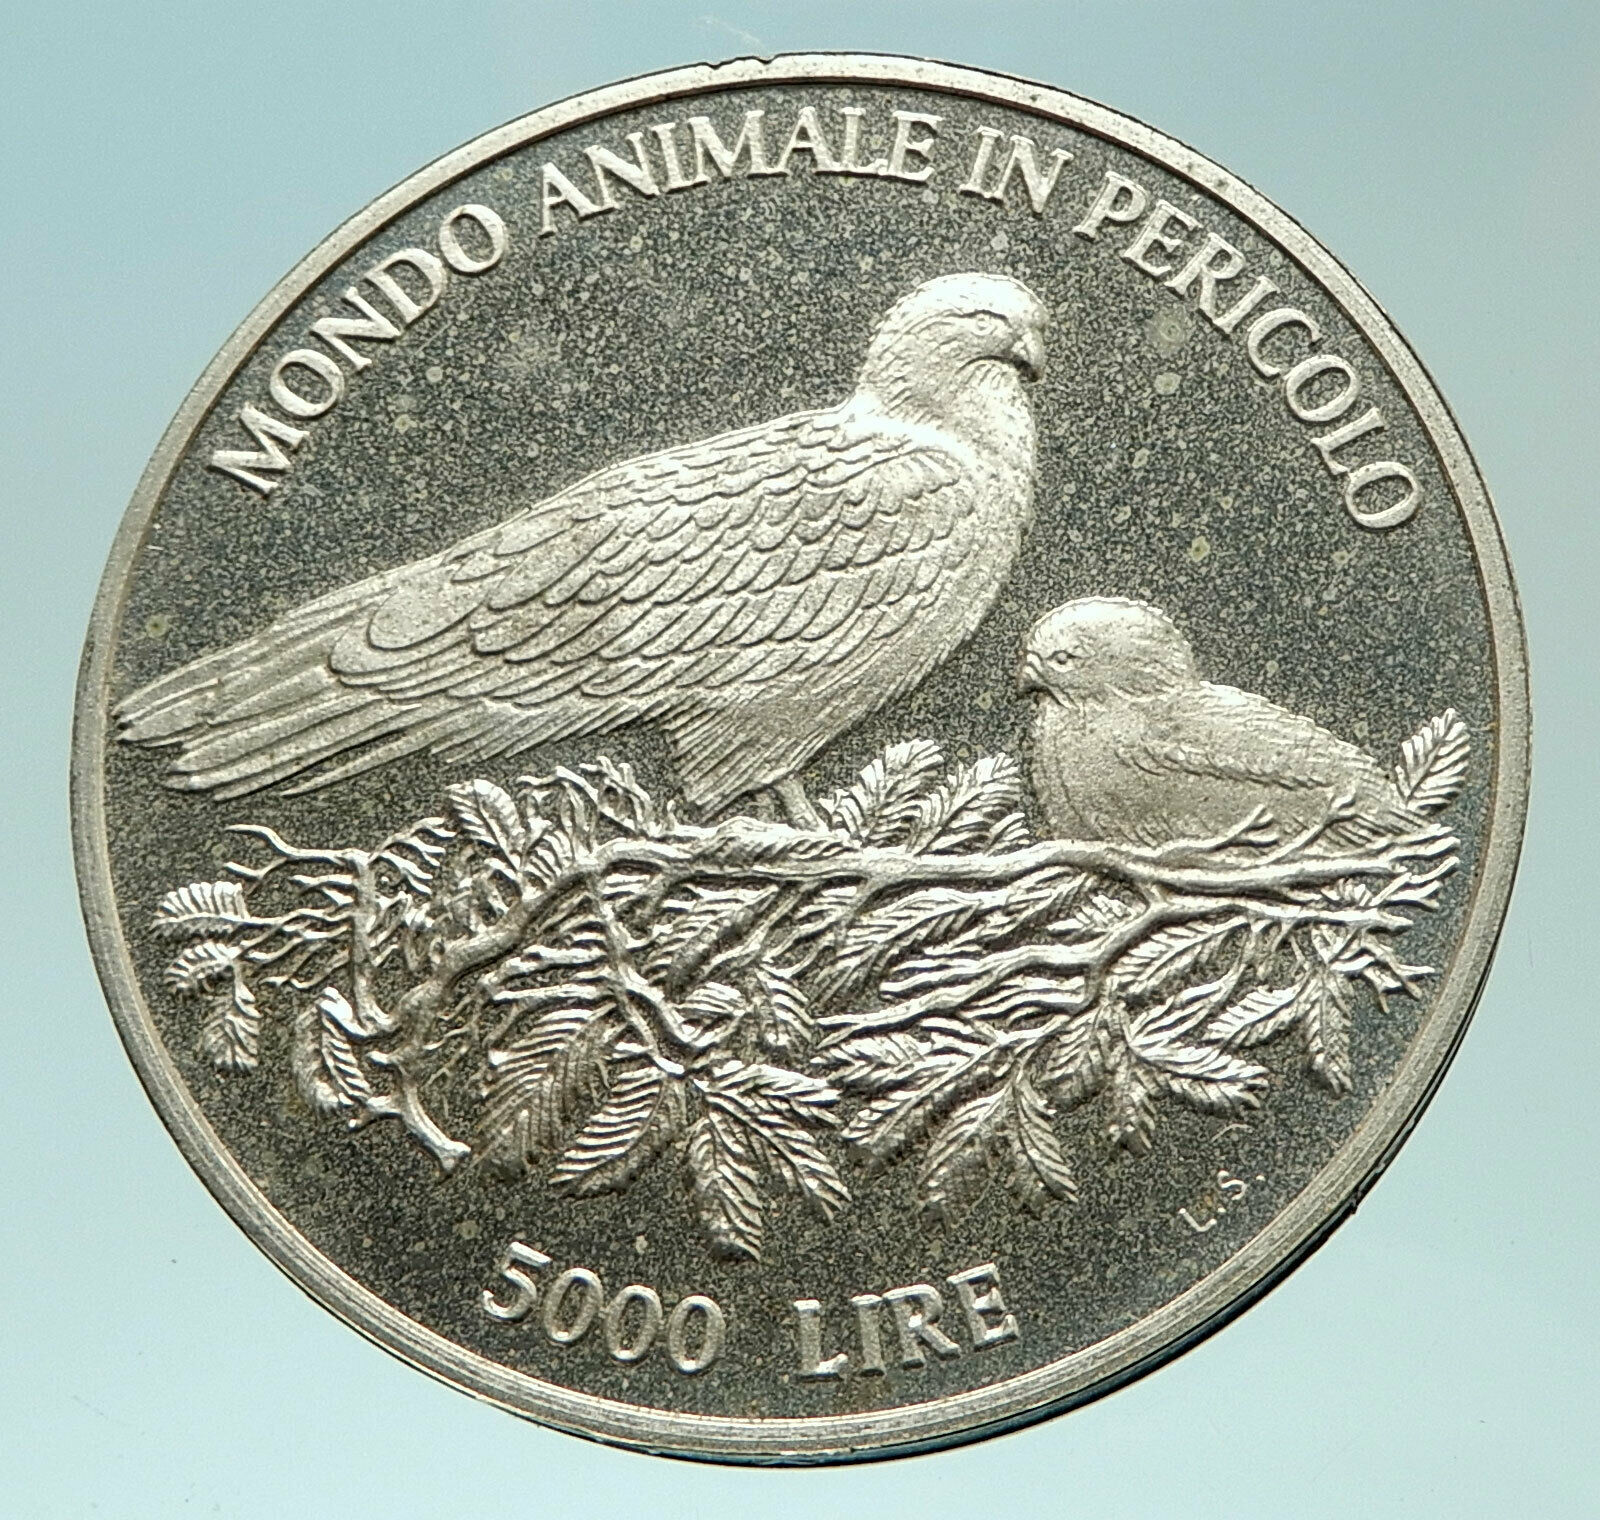 1996 SAN MARINO Italy with ENDANGERED Birds Silver Genuine 5000 Lire Coin i75924